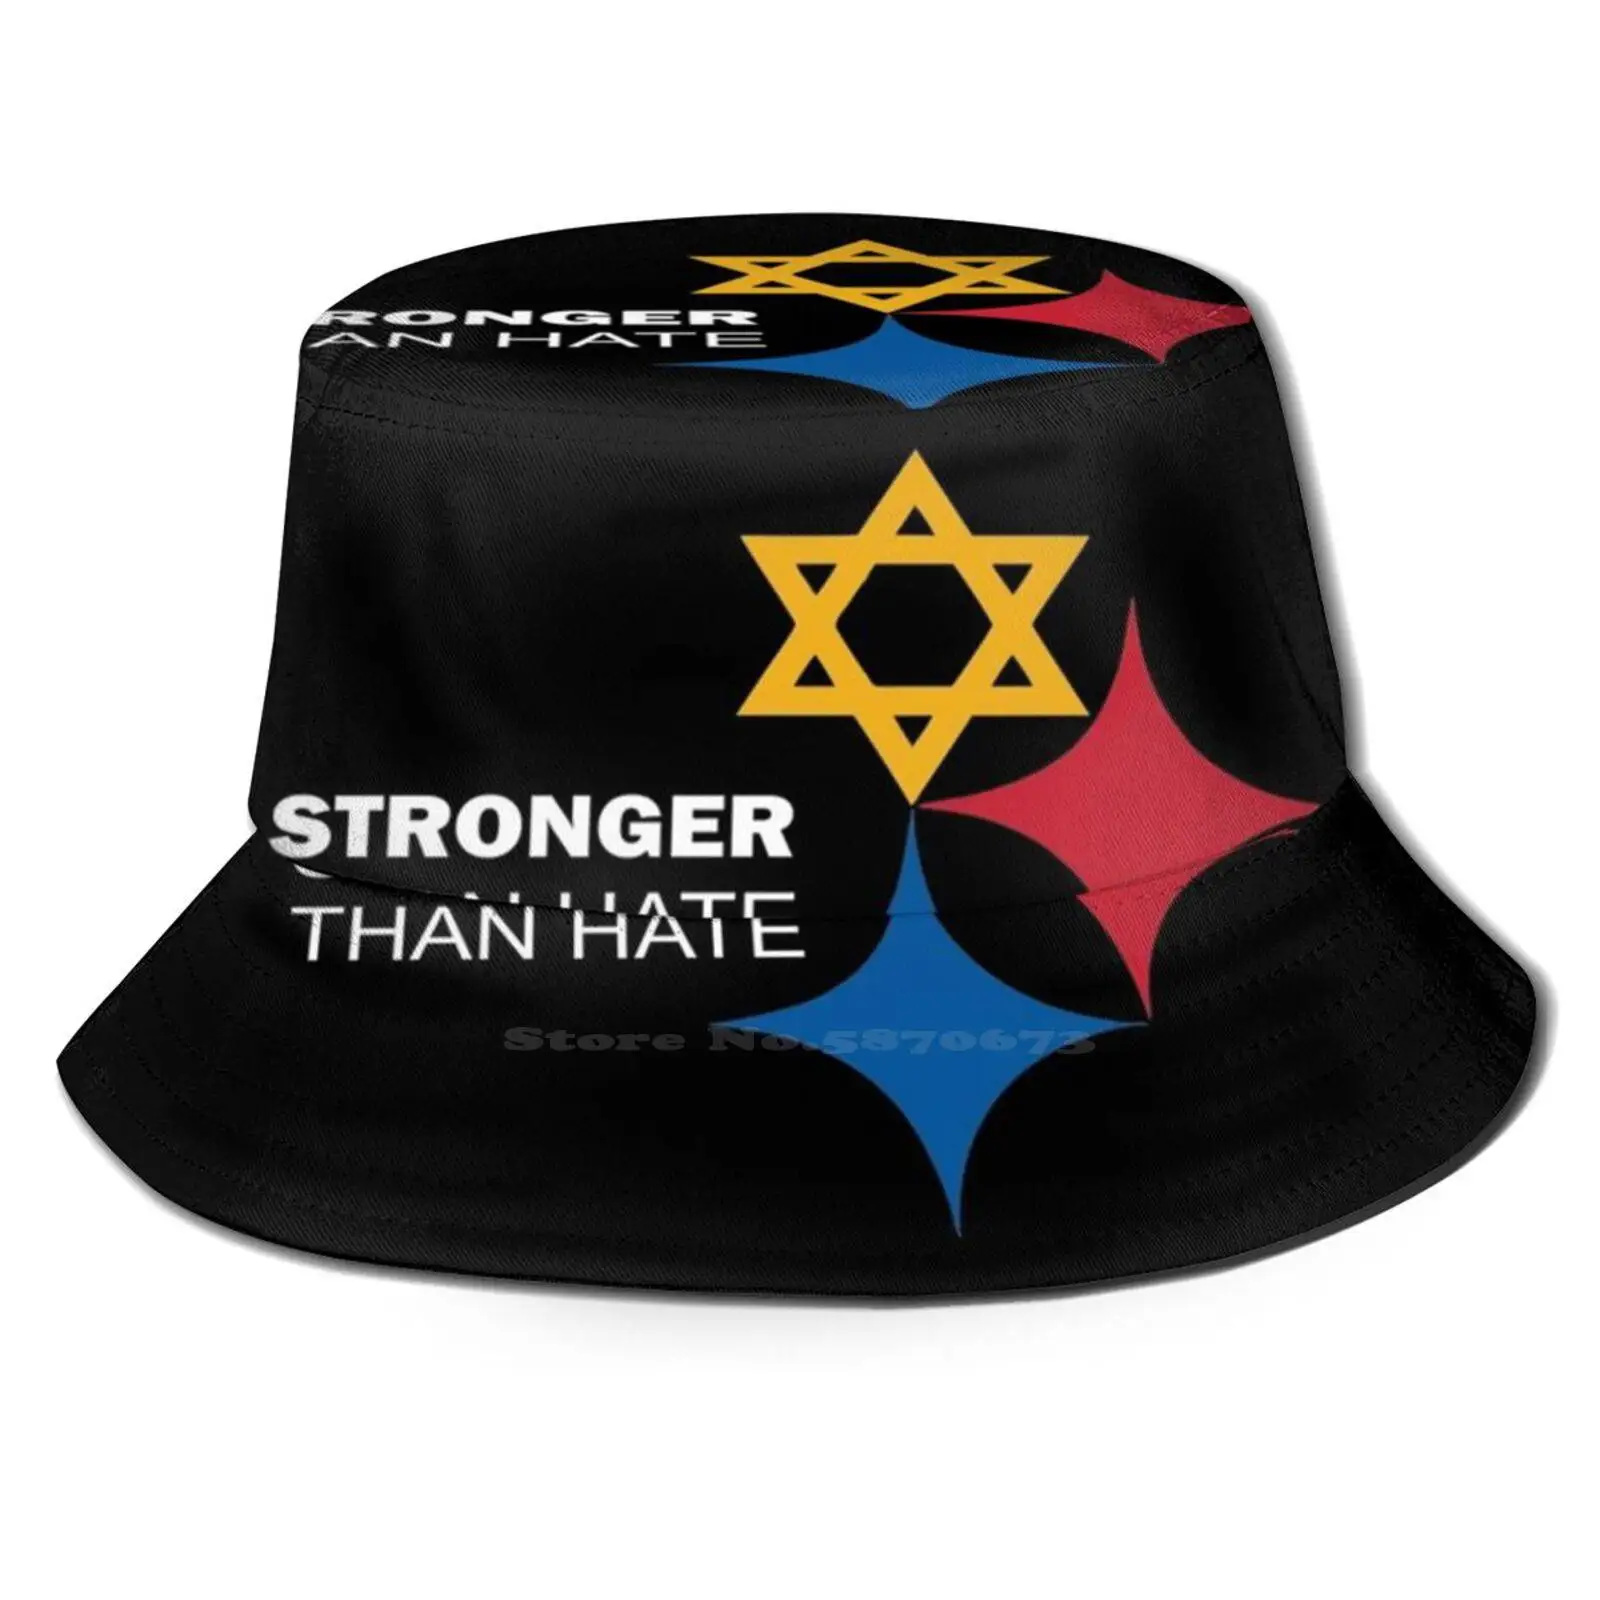 

Black Friday Sale-Pittsburgh Is Stronger Than Hate Unisex Fisherman Hats Cap 1980 8 Bit Pittsburgh Strong Jewish Love